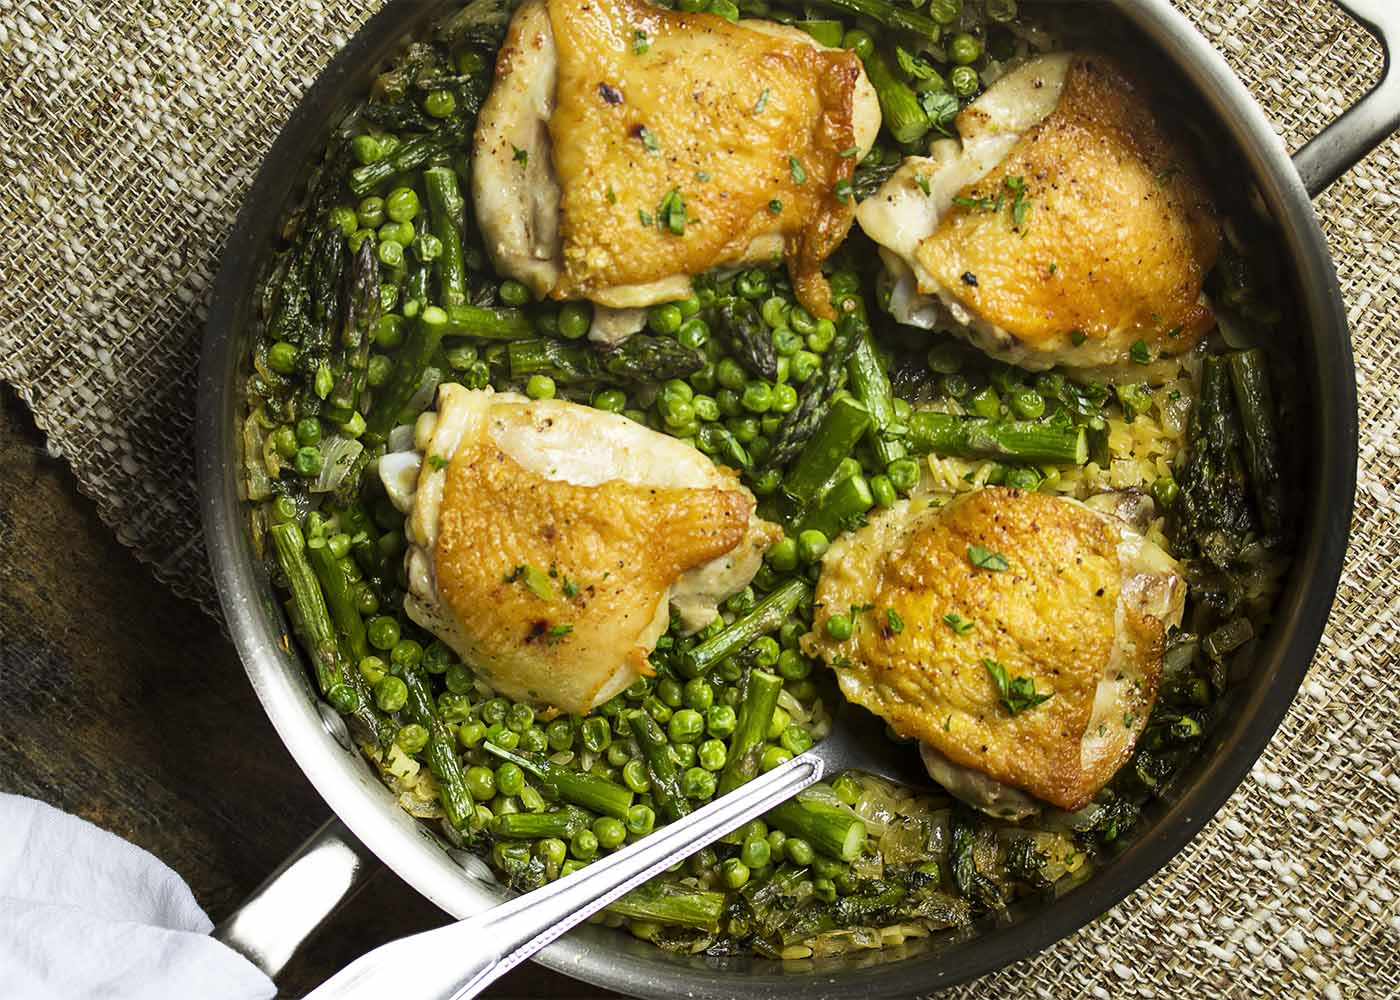 Top view of a skillet filled with chicken thighs, orzo, asparagus, and peas.